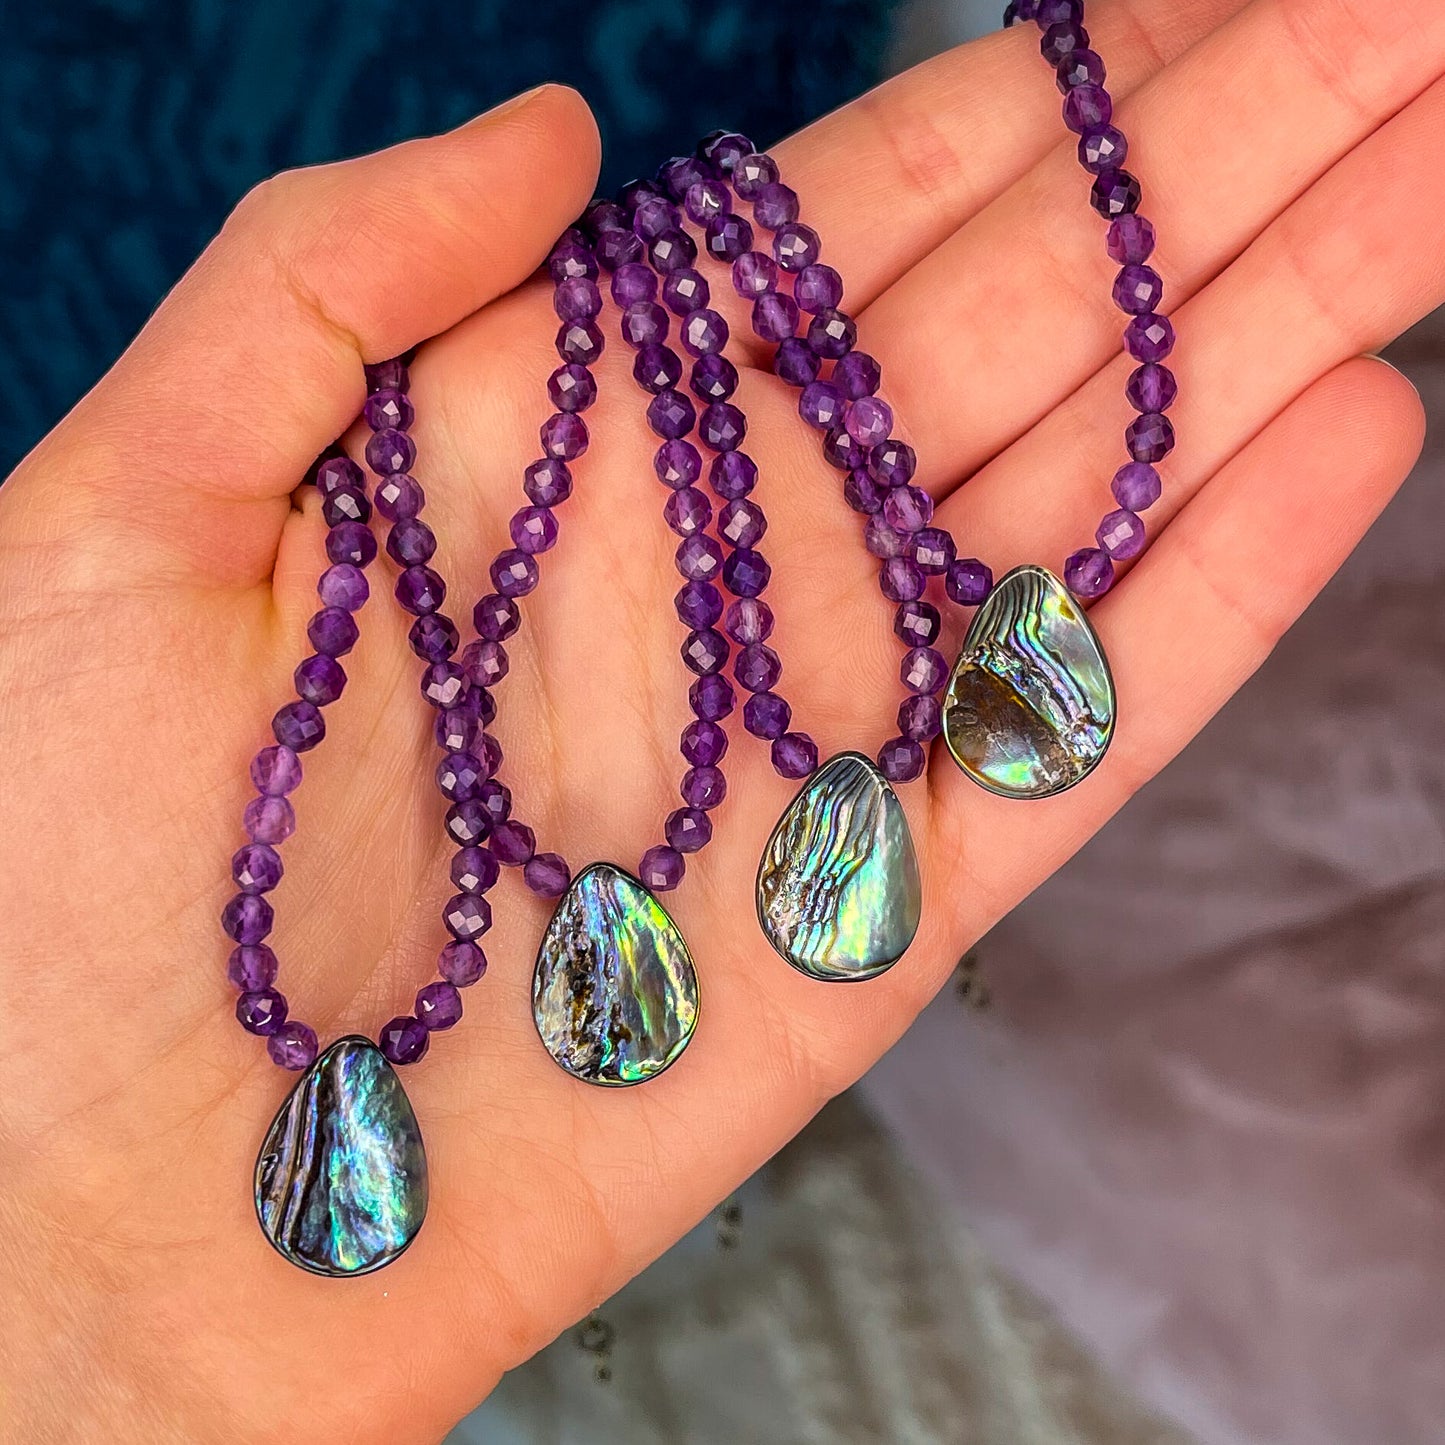 Amethyst Abalone Necklaces